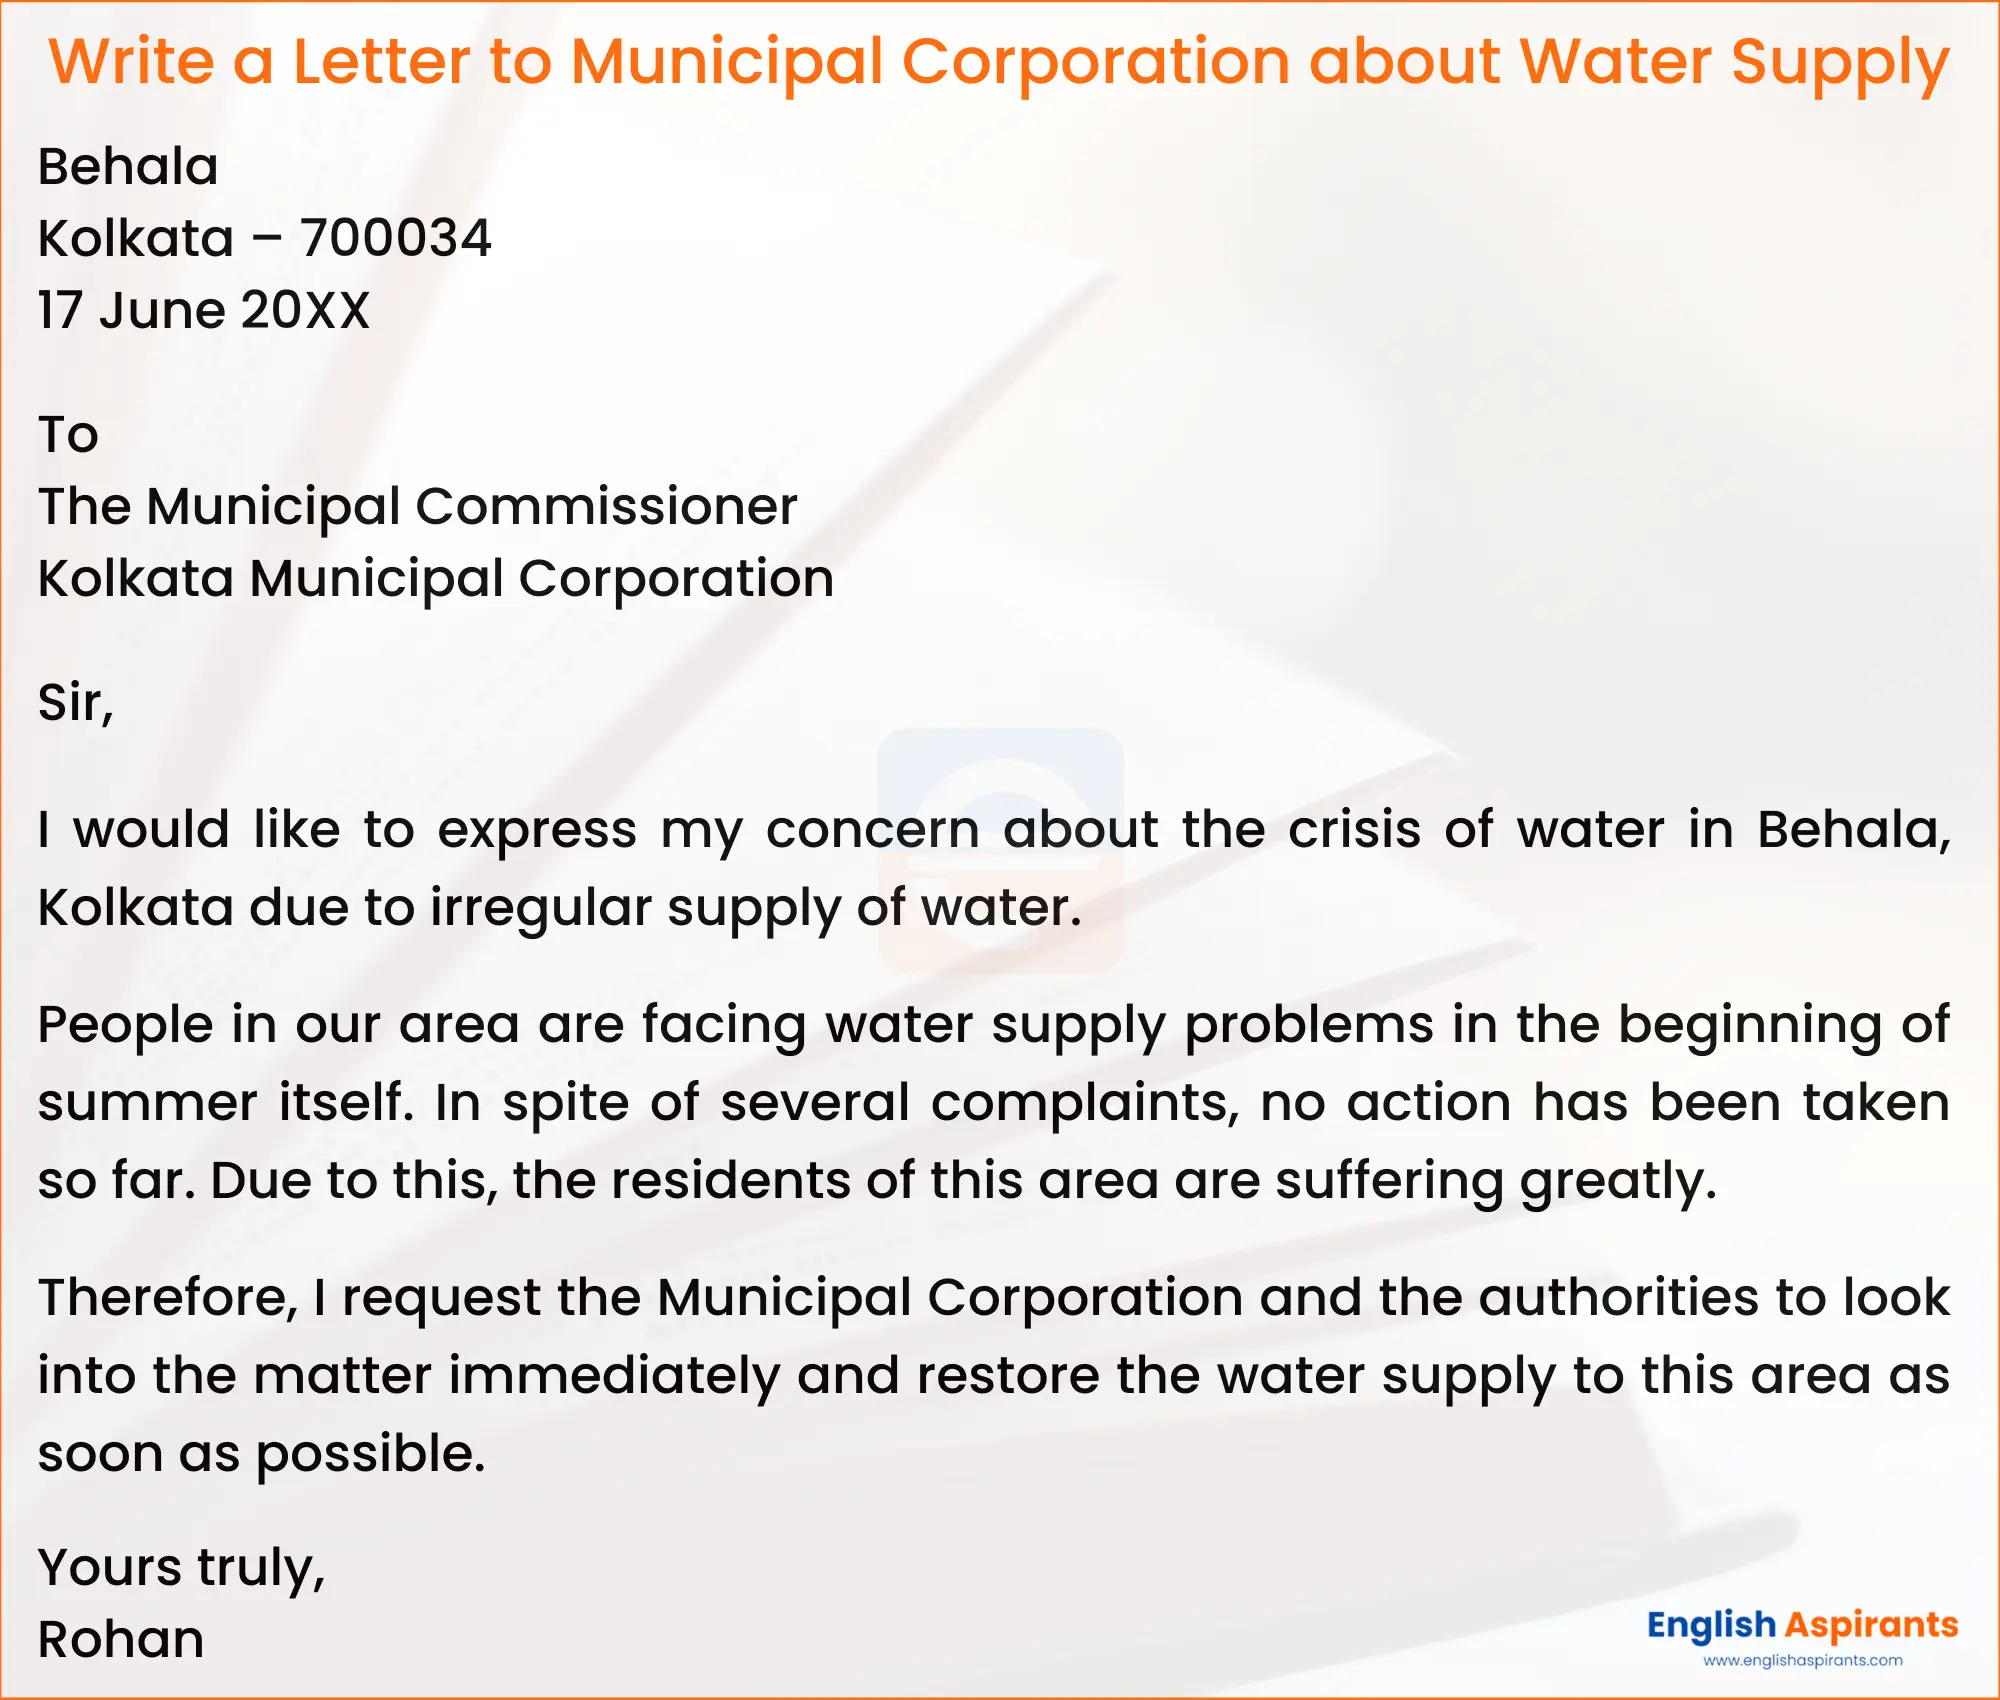 Write a Letter to Municipal Corporation about Irregular Water Supply